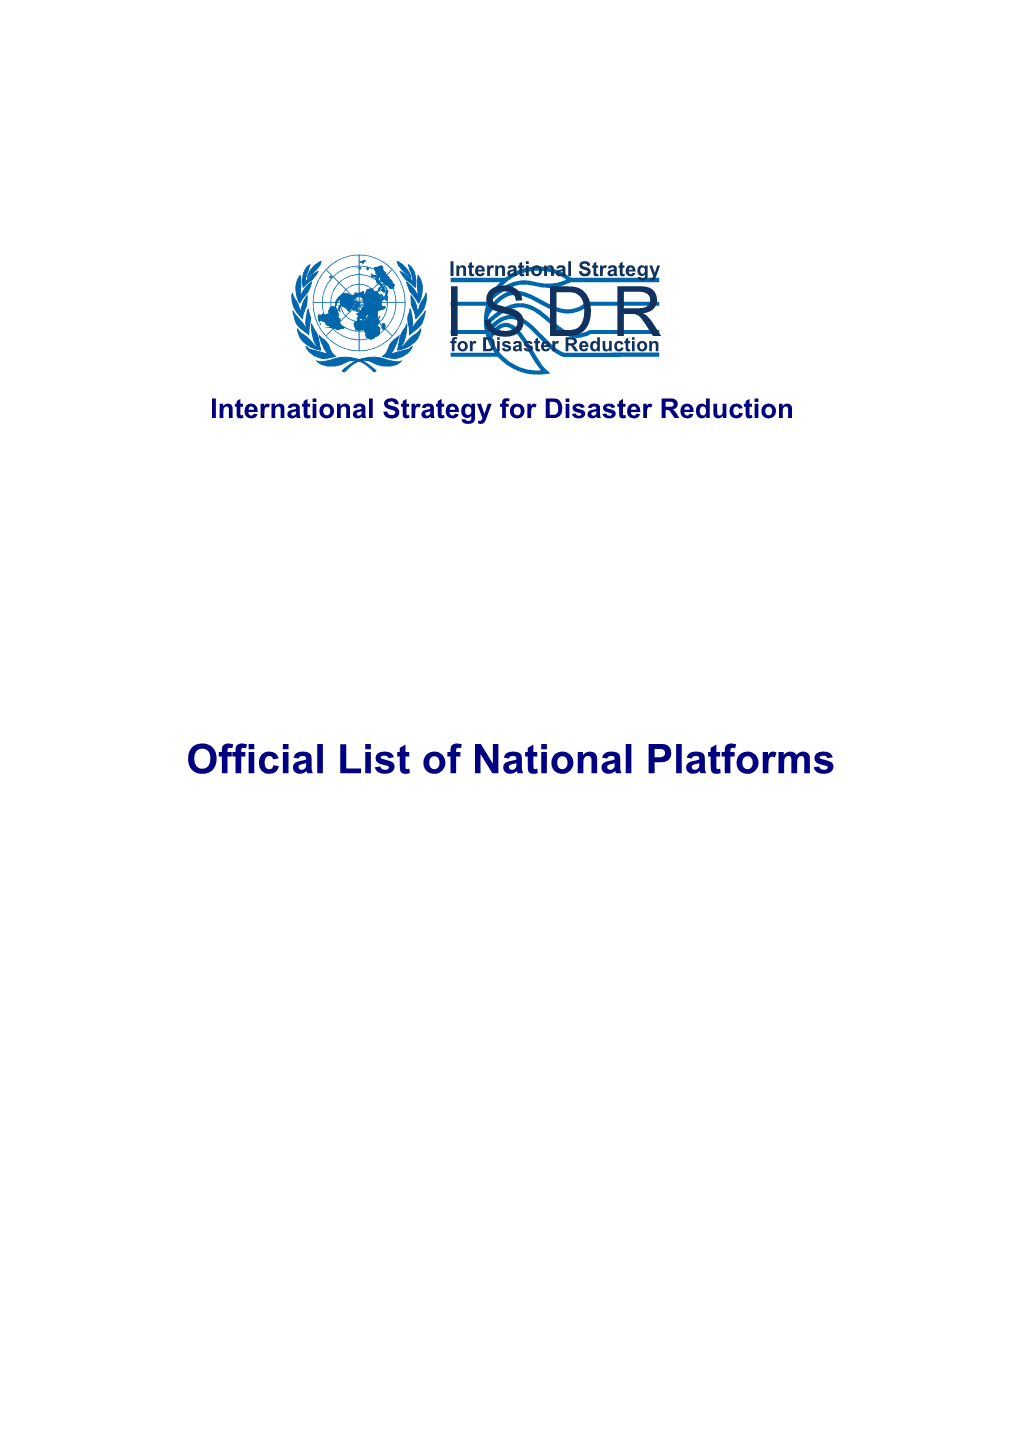 Official List of National Platforms Official List of National Platforms